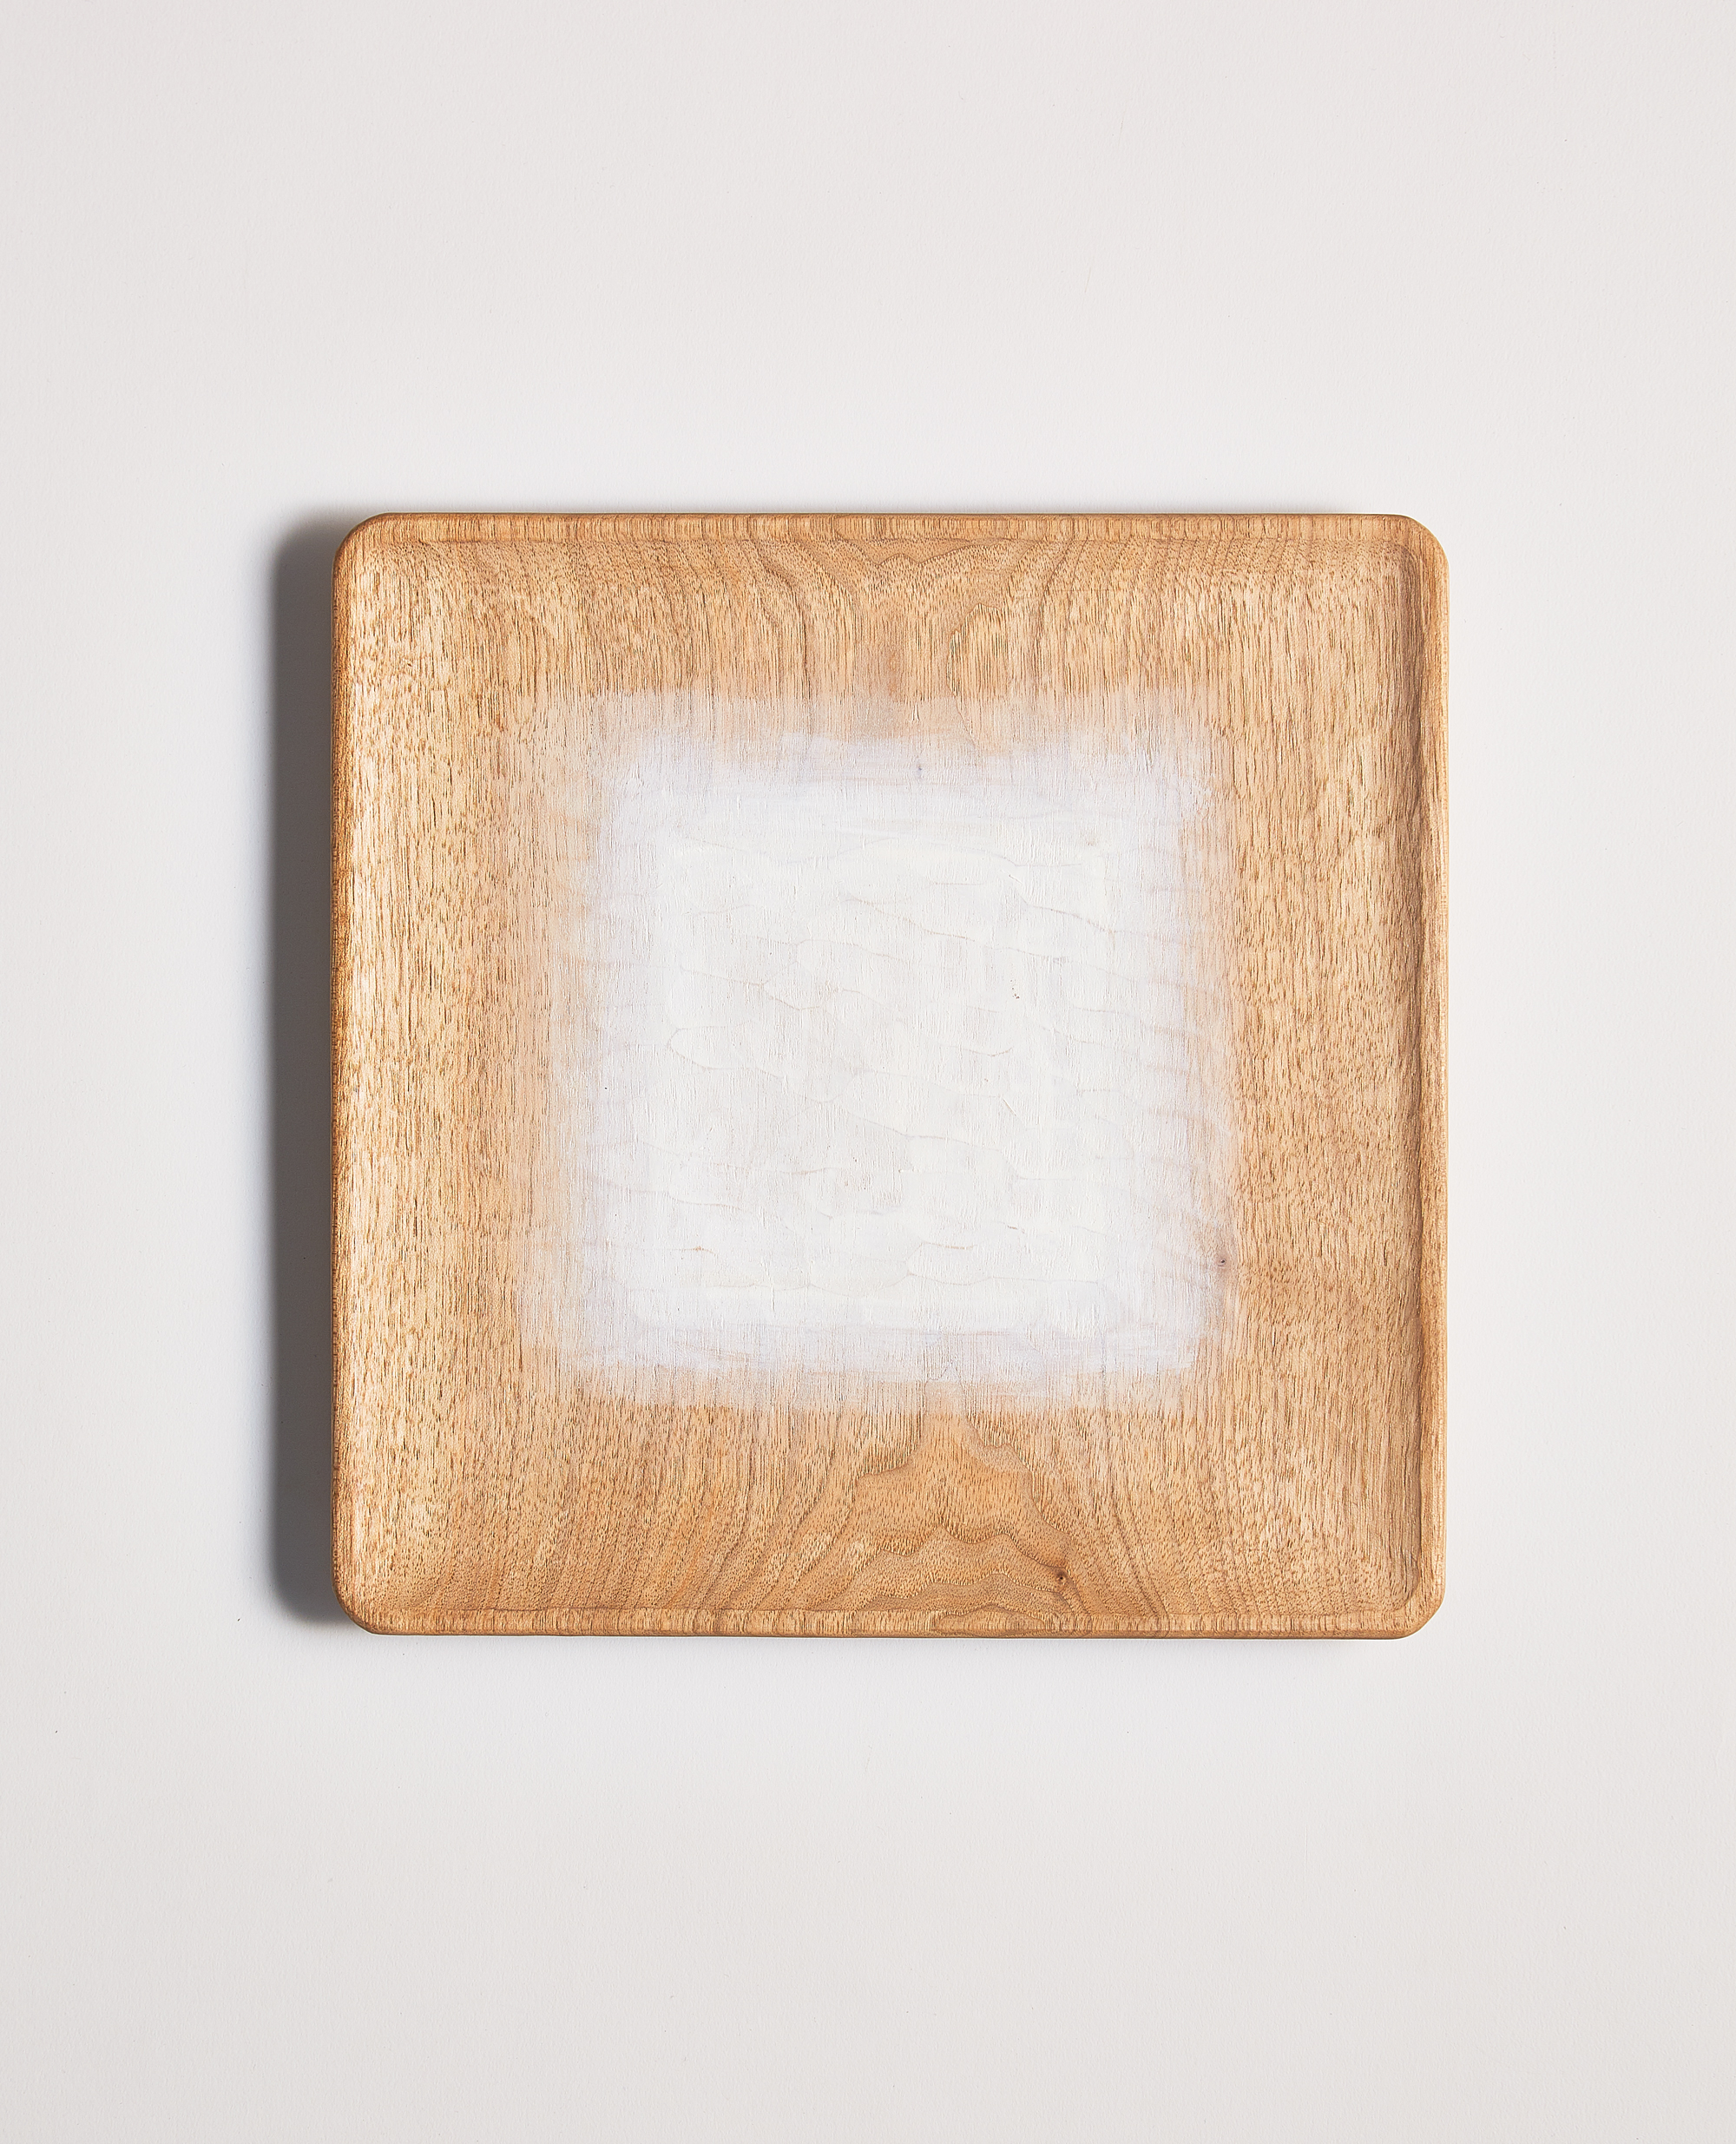 Square white pigment painted wooden chestnut plate by Ryuji Mitani